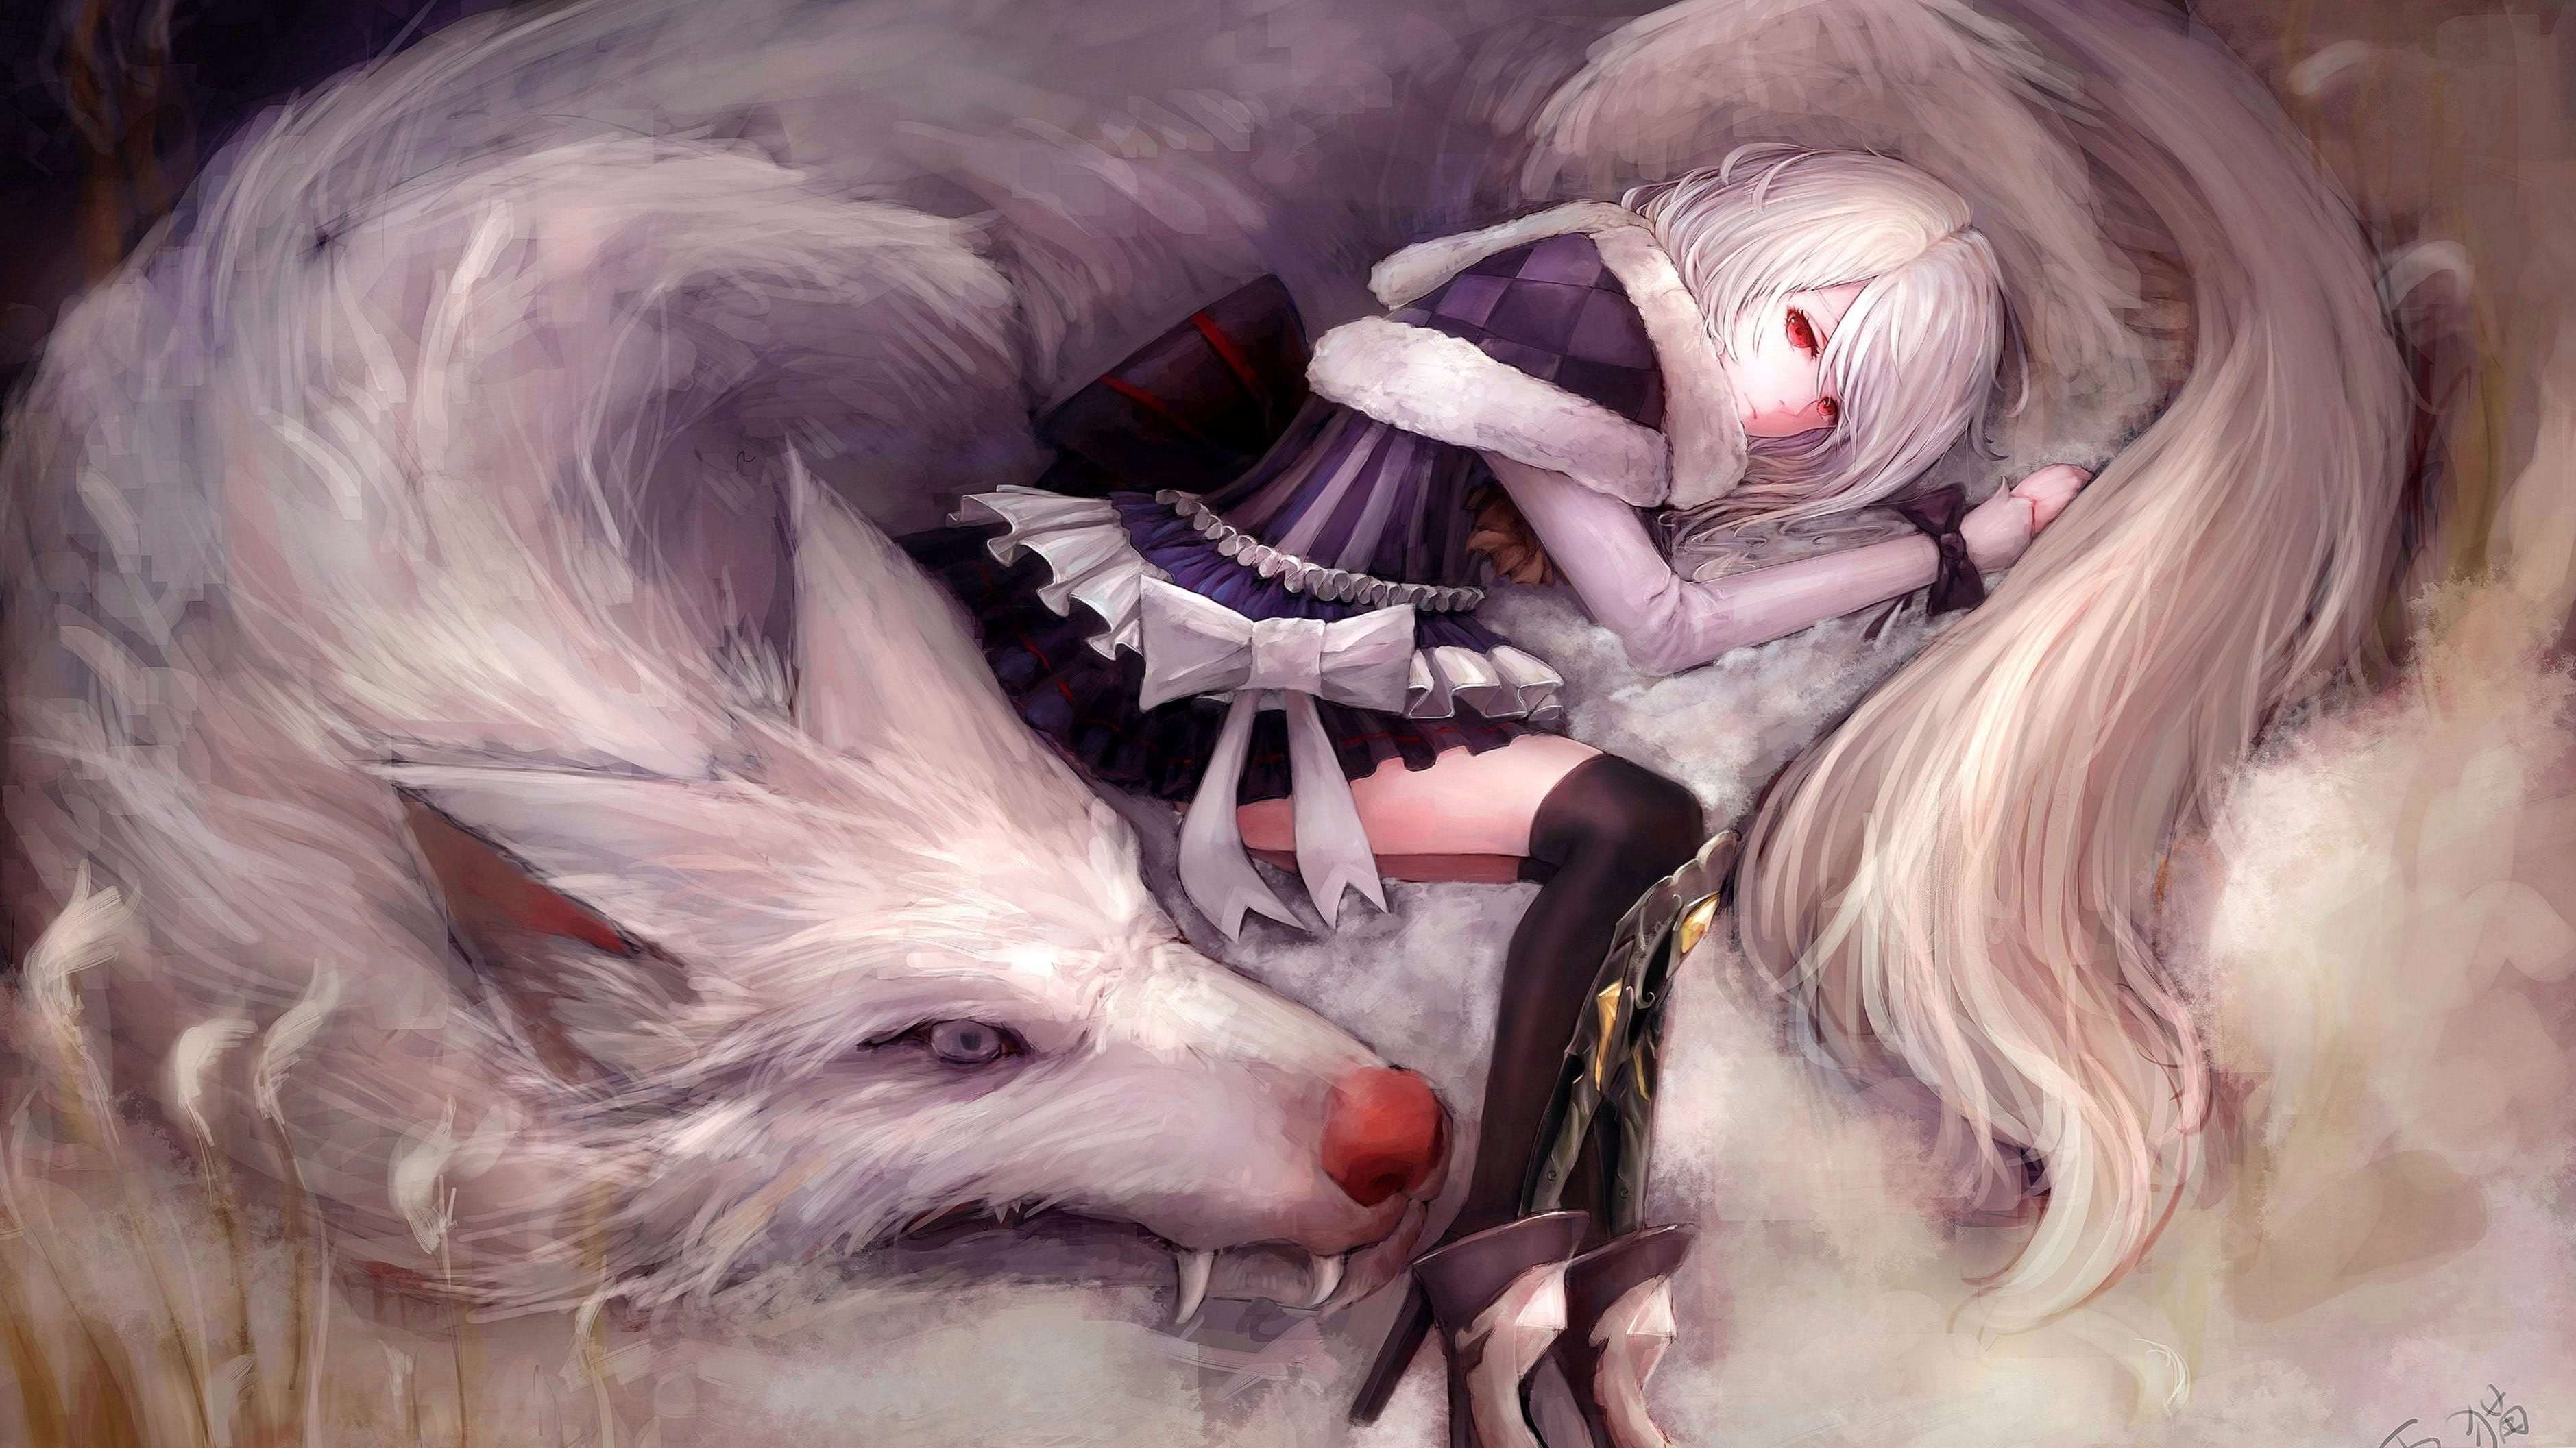 Wallpaper Fantasy Girl And Wolf Image 1